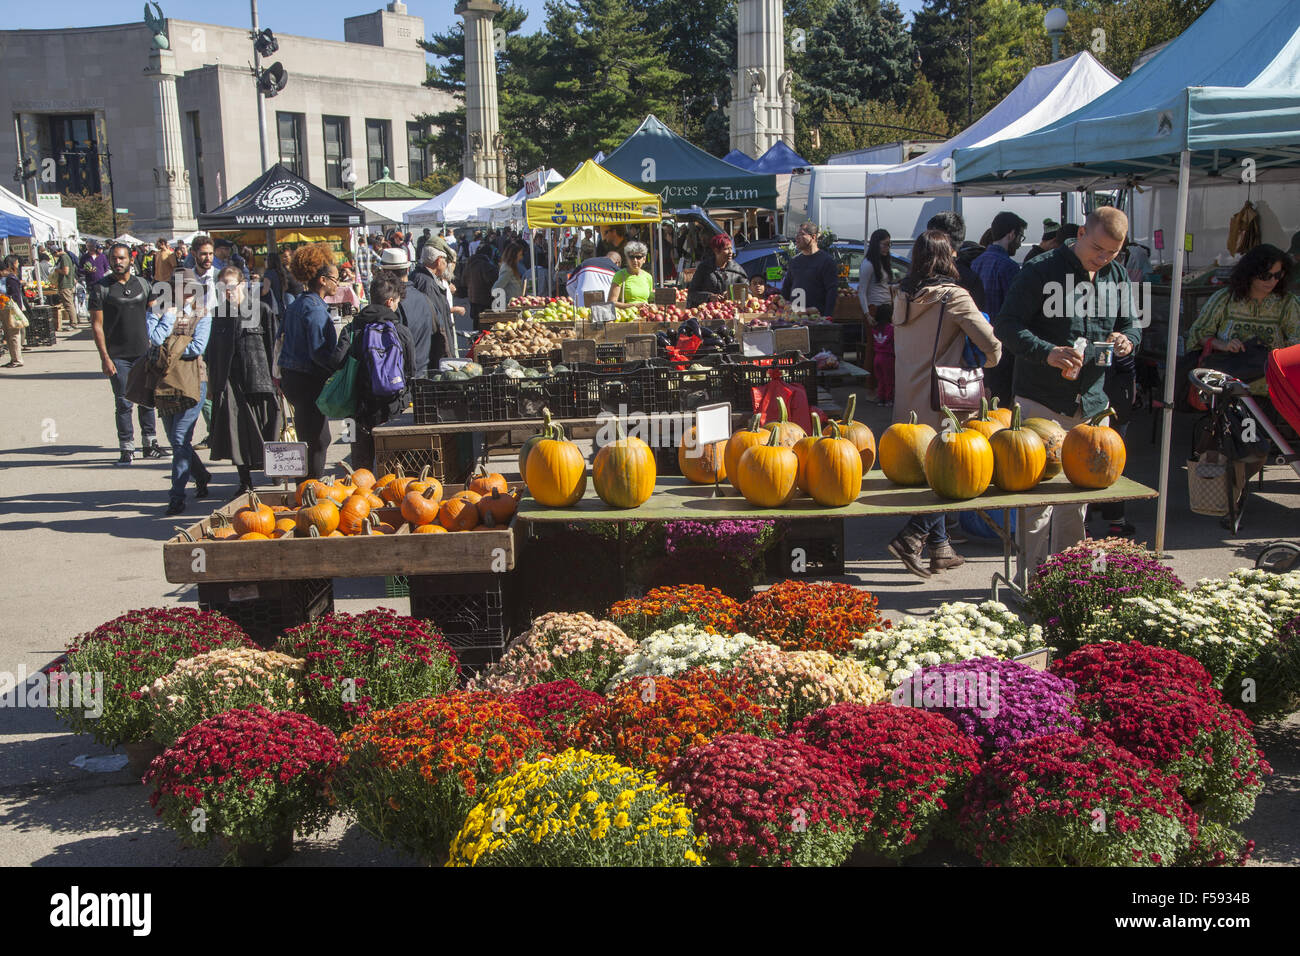 Herbsttag auf der Grand Army Plaza Farmers Market in Park Slope, Brooklyn, NY. Stockfoto